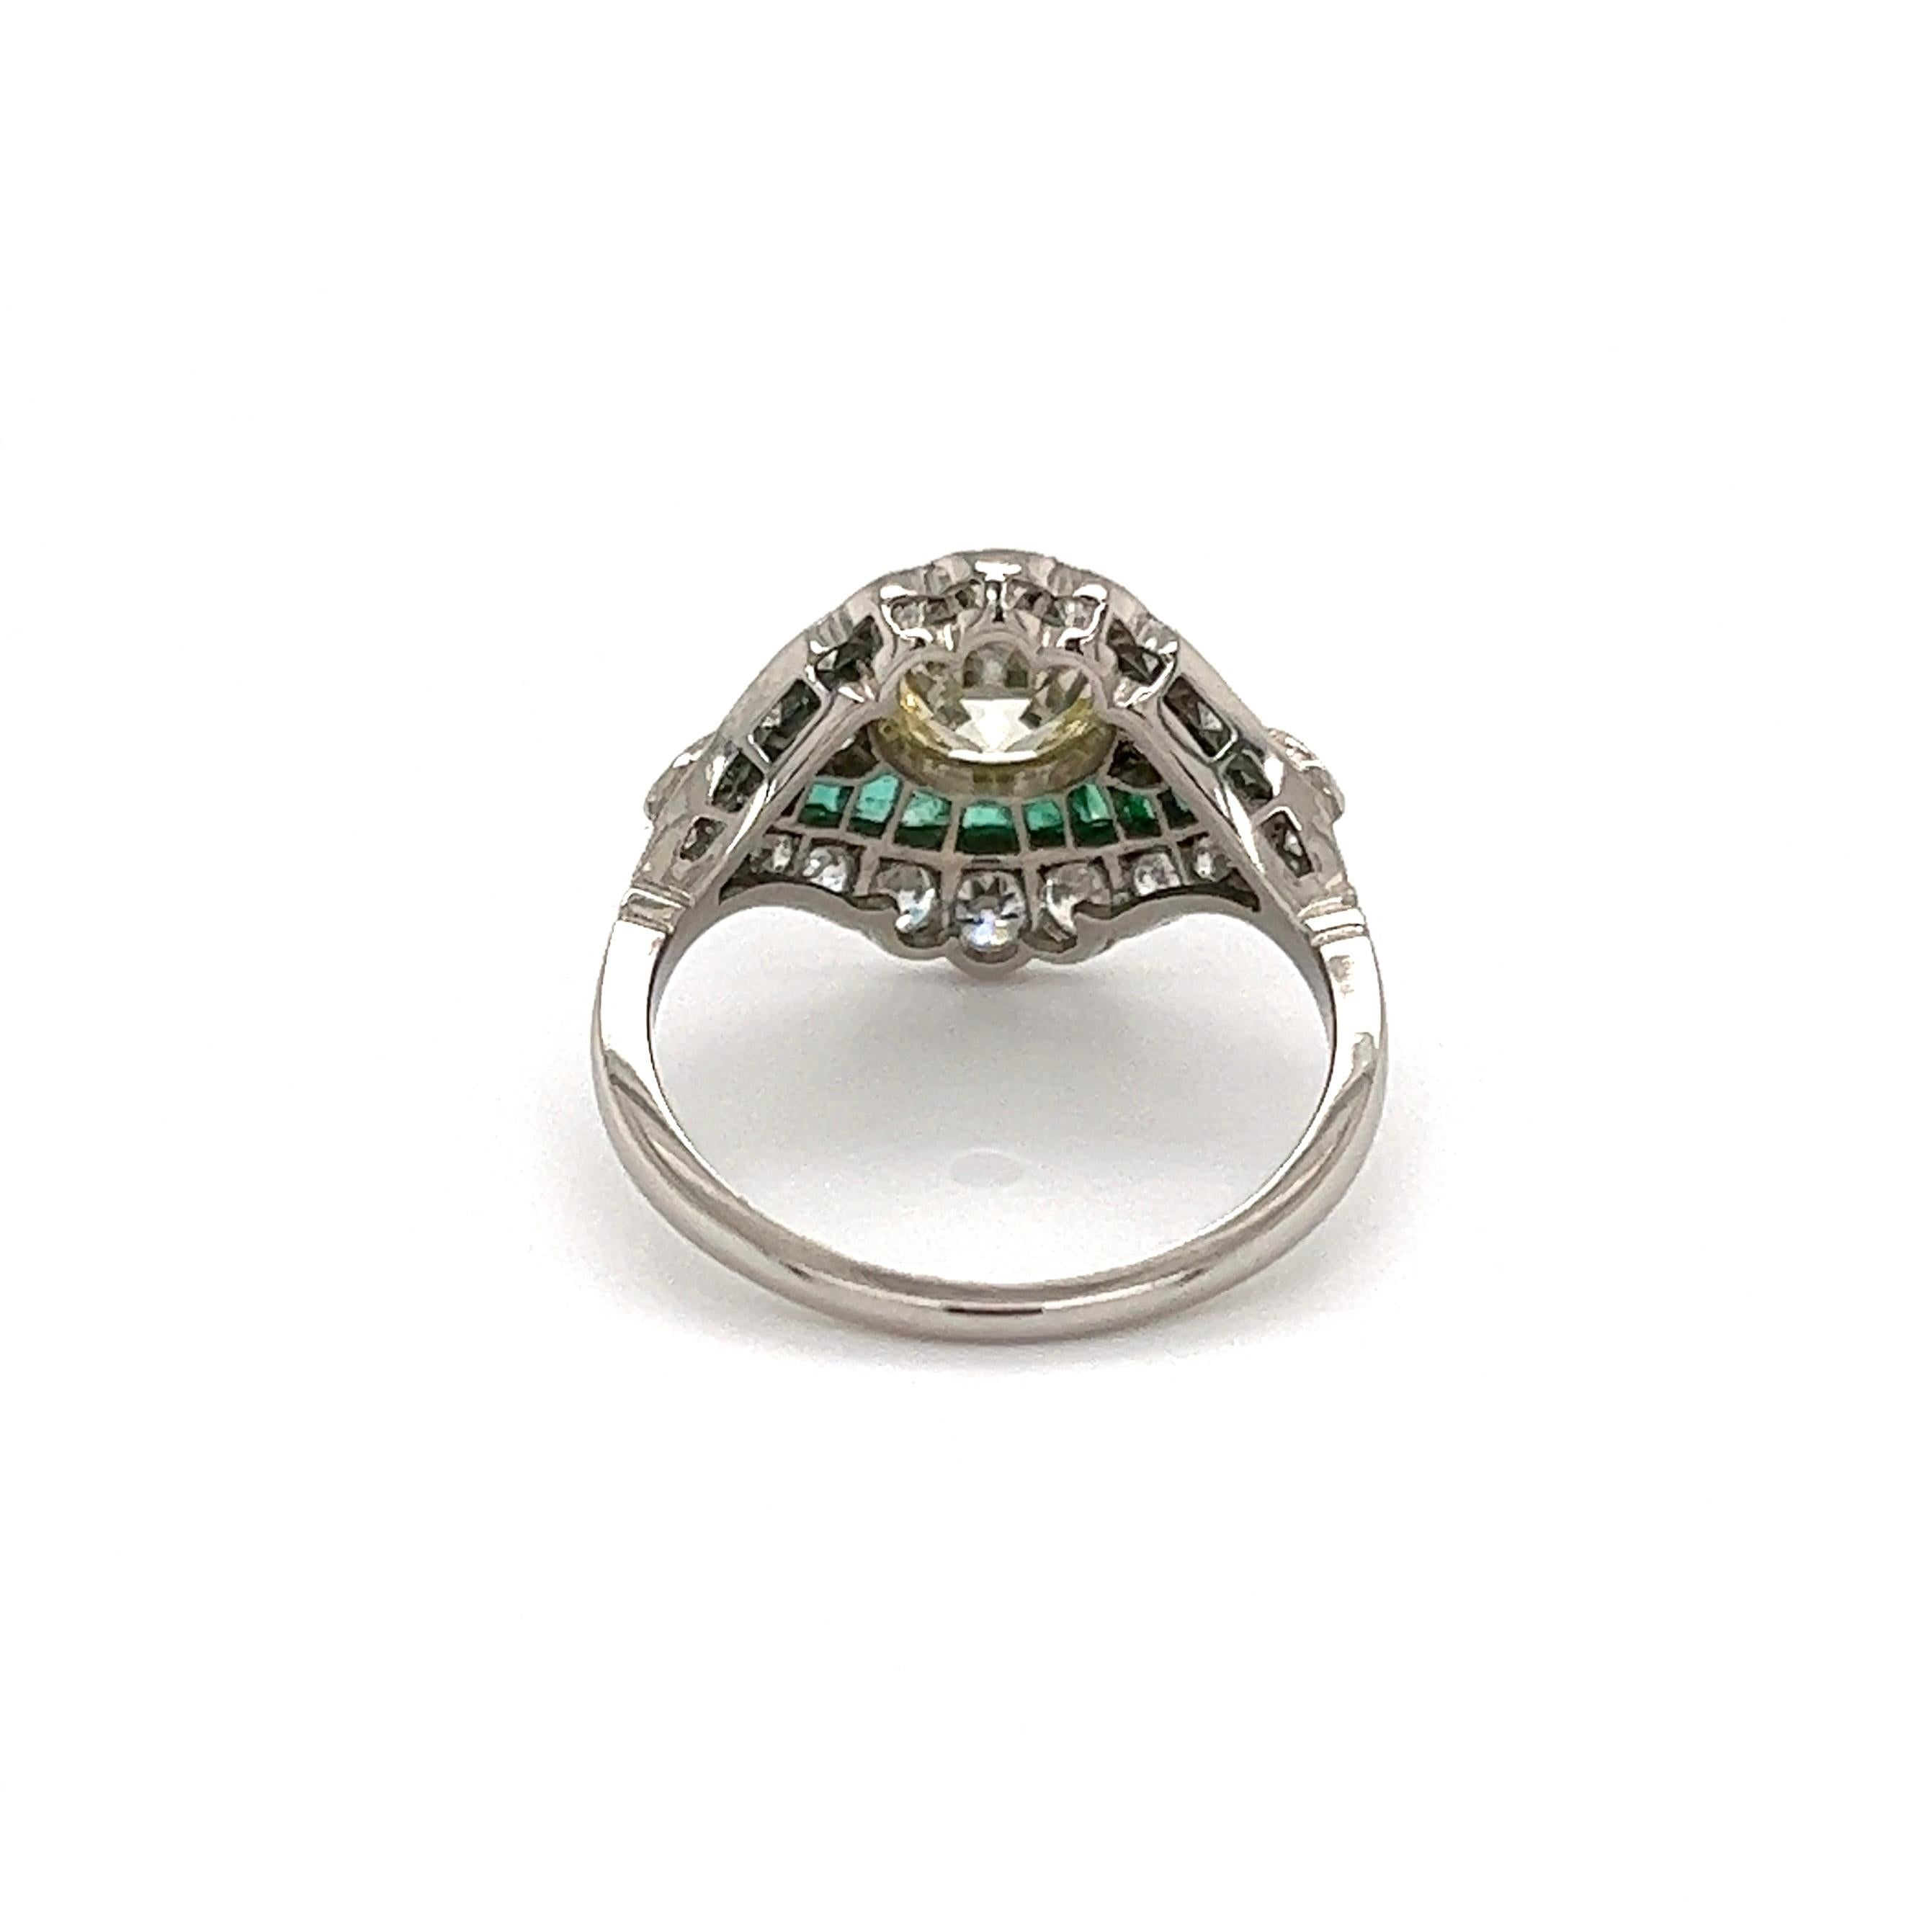 Mixed Cut 1.18 Carat Diamond and Emerald Platinum Deco Revival Ring Estate Fine Jewelry For Sale